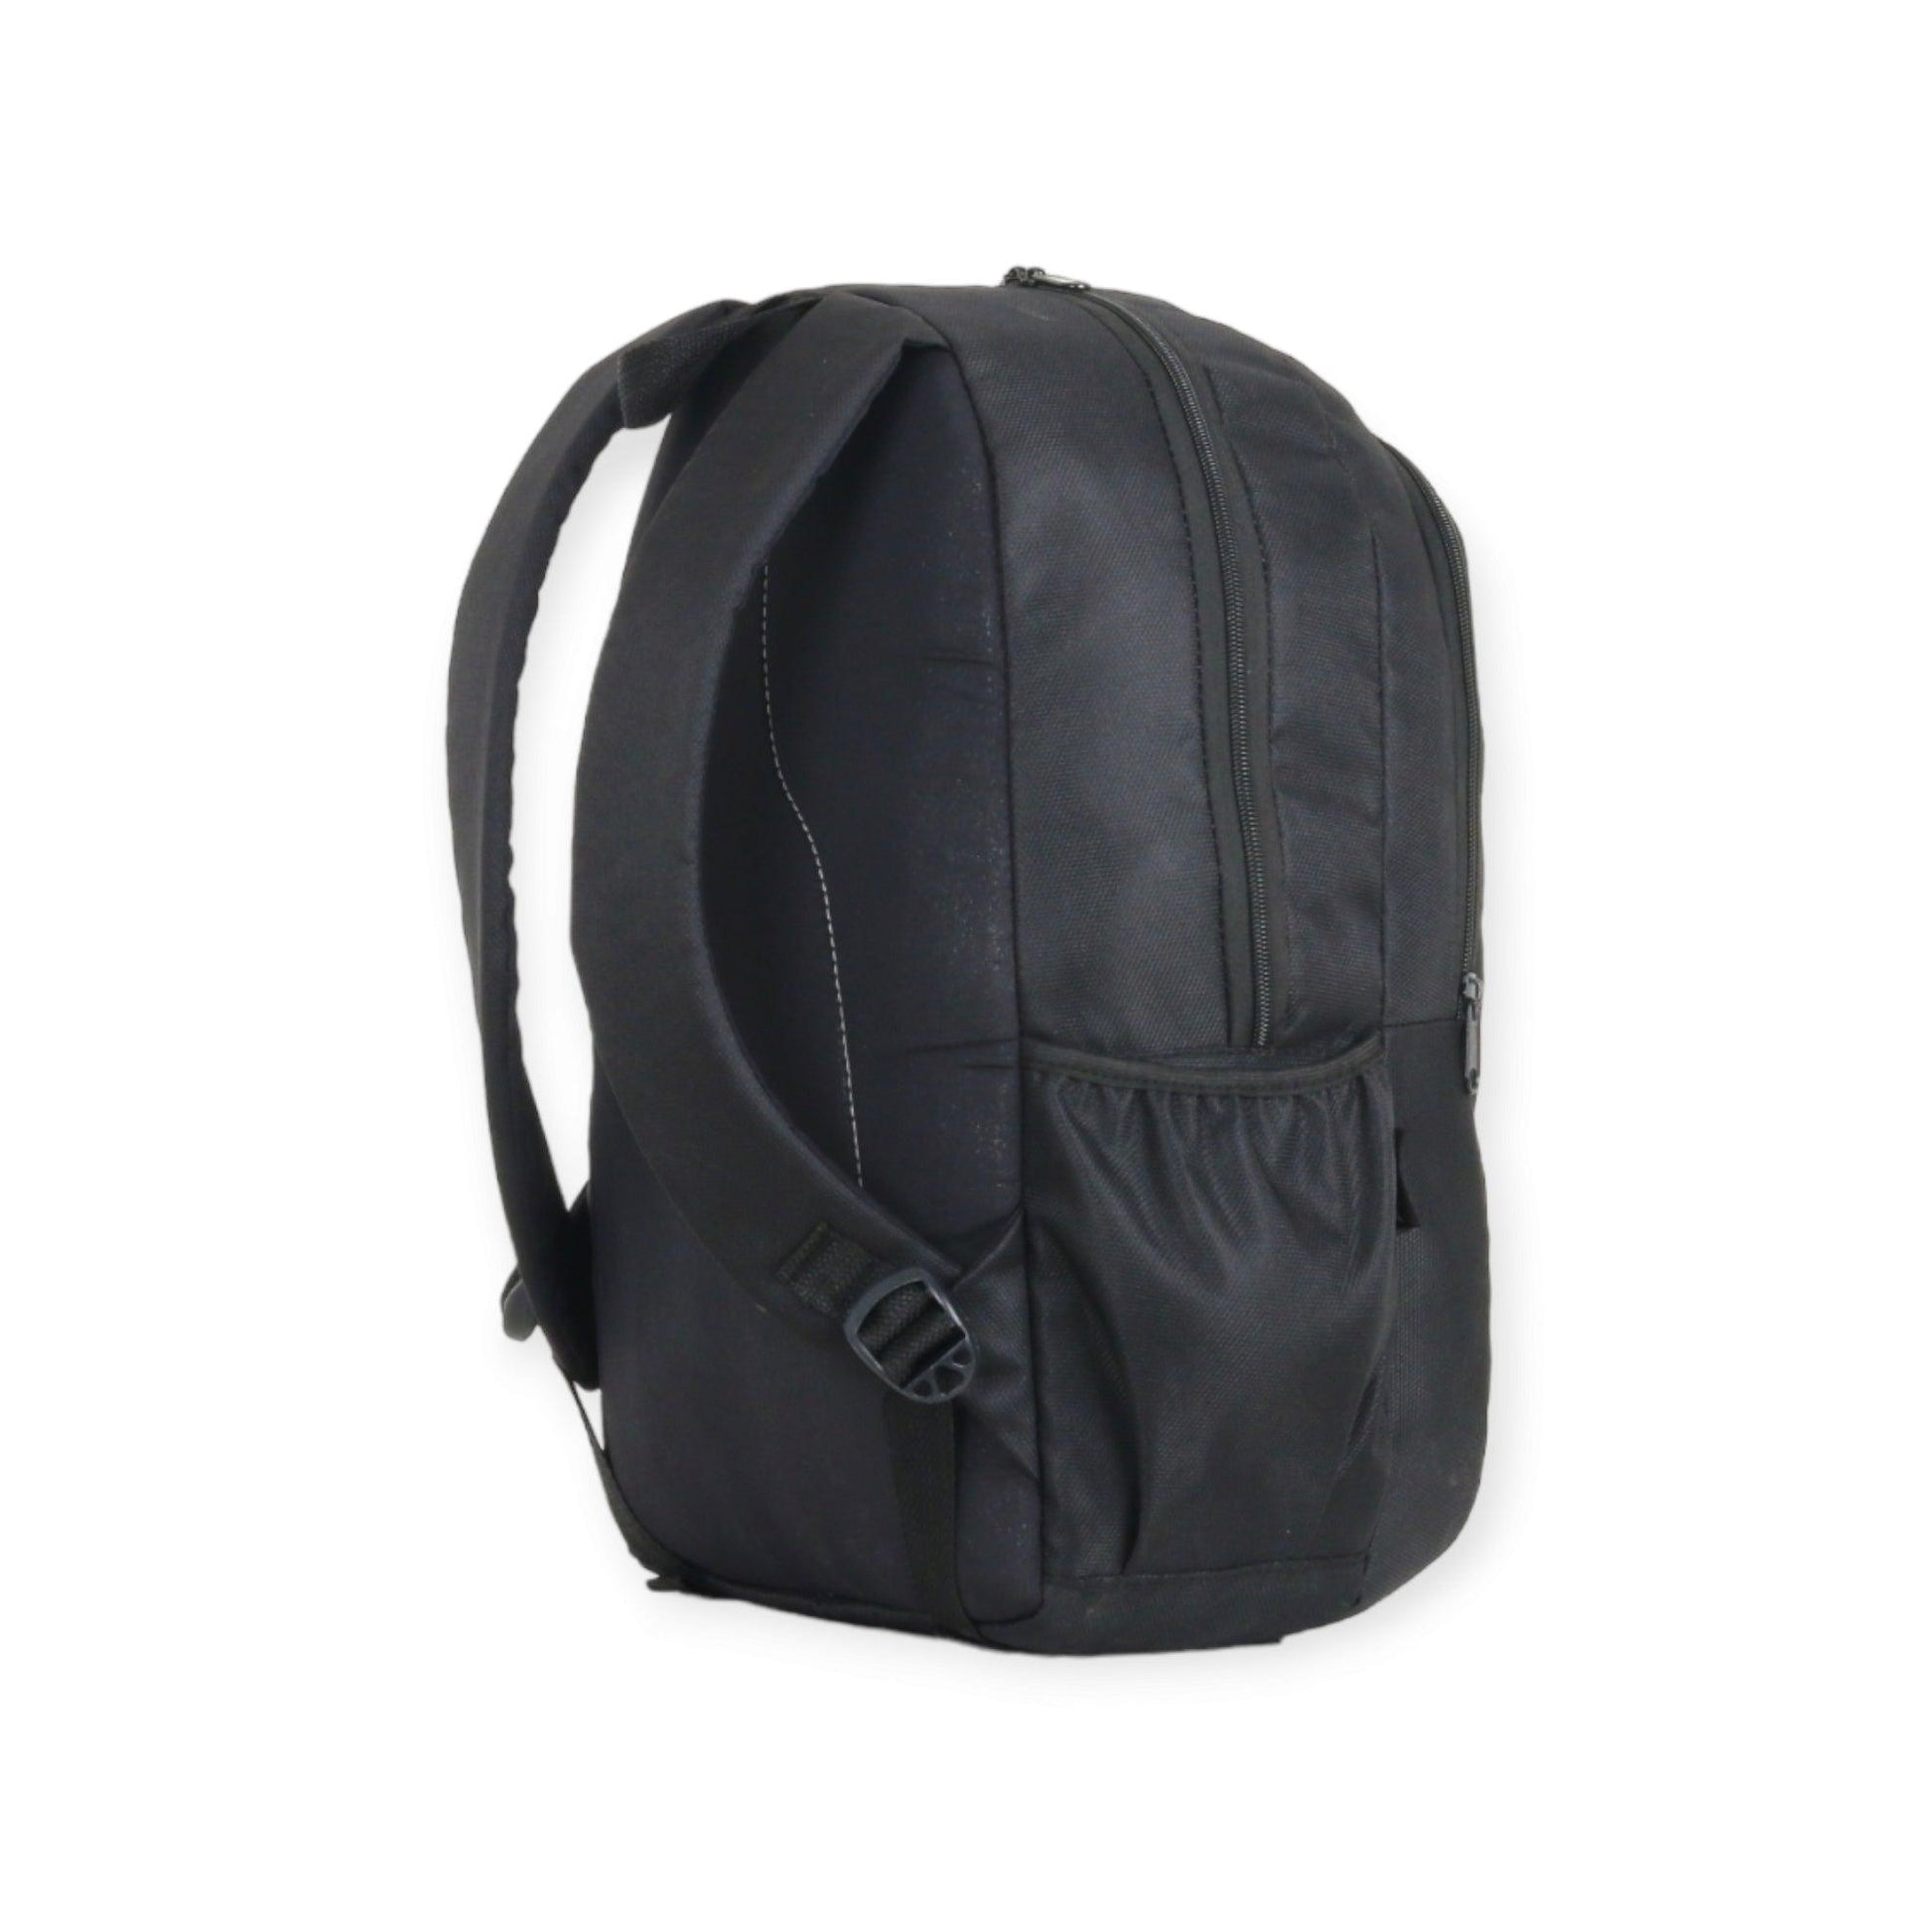 Force laptop 15.6" Backpack Unisex -Black - new edition - FNE-020 - FORCE STORES